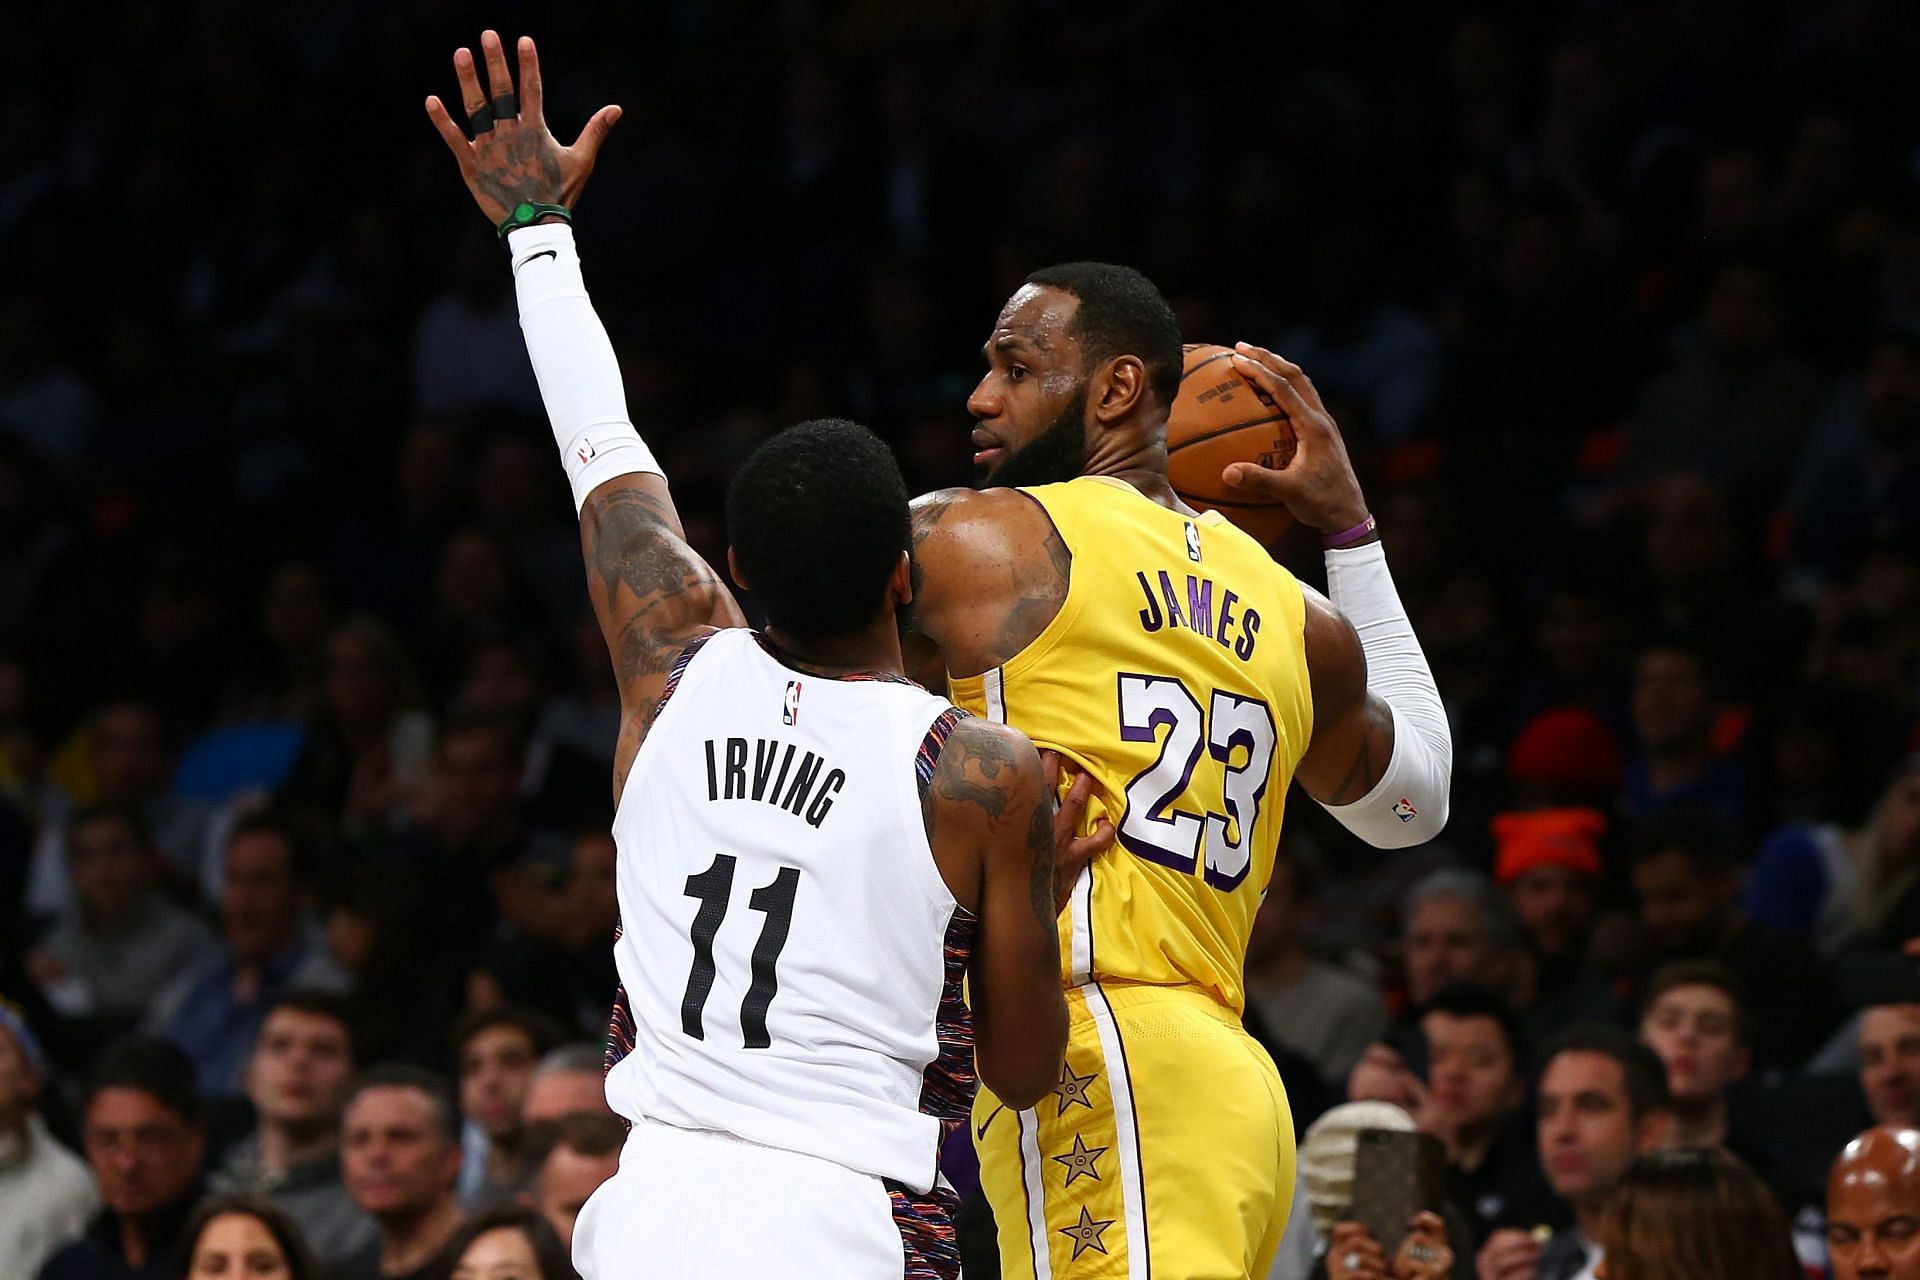 LeBron James of the LA Lakers against Kyrie Irving of the Brooklyn Nets